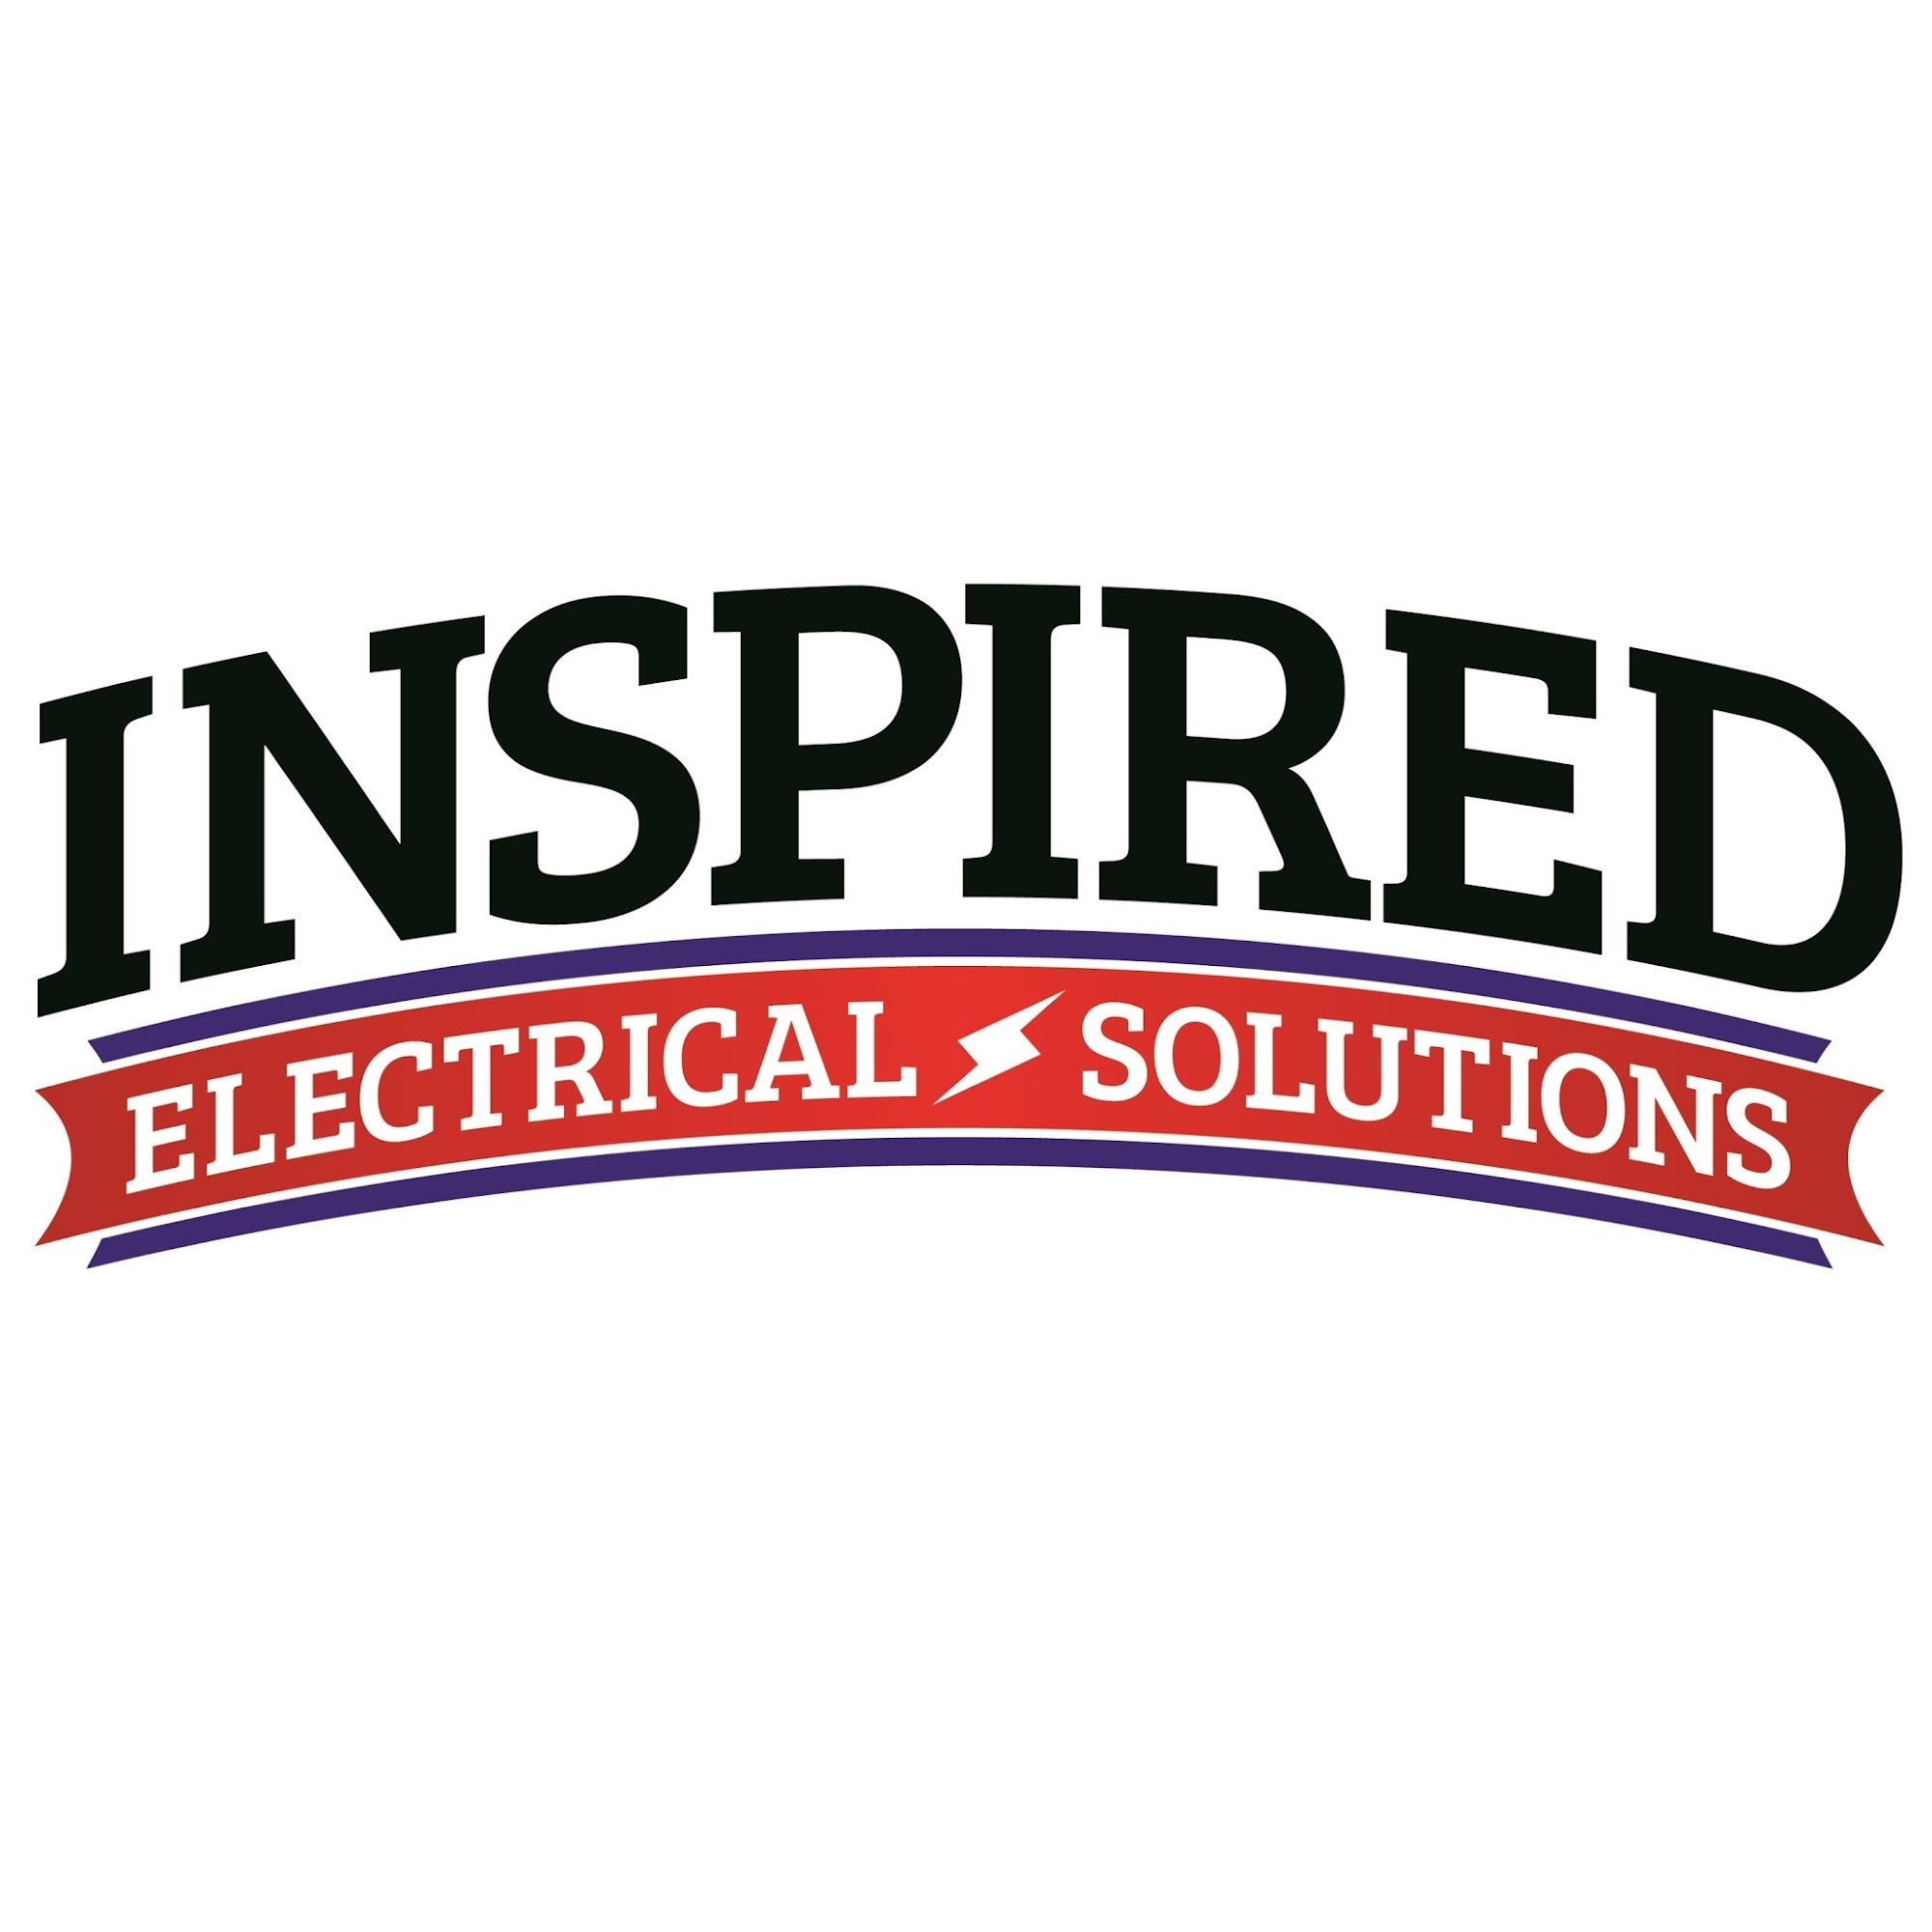 Inspired Electrical Solutions Inc. 31330A Constitution Hwy, Locust Grove Virginia 22508